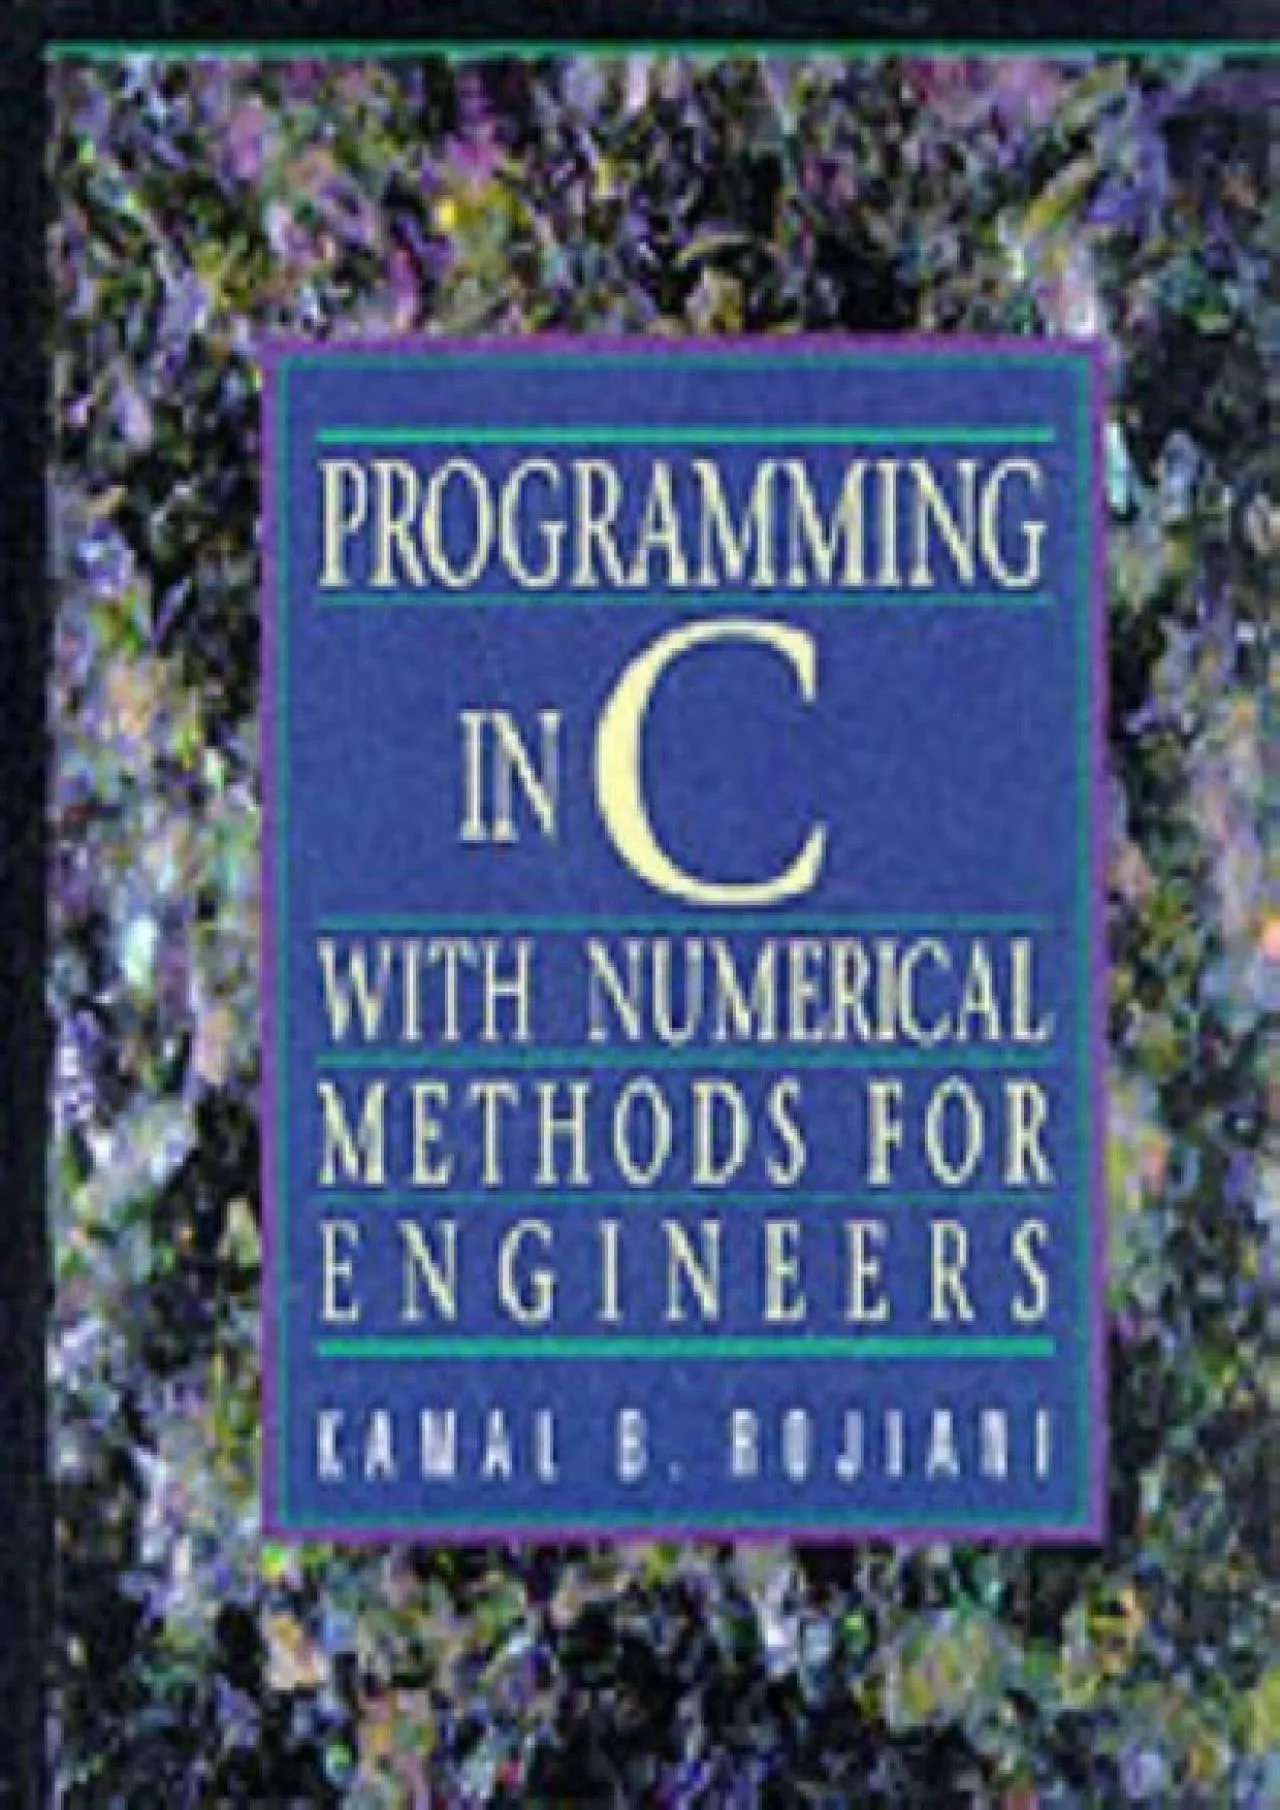 [READING BOOK]-Programming in C with Numerical Methods for Engineers by Kamal B. Rojiani